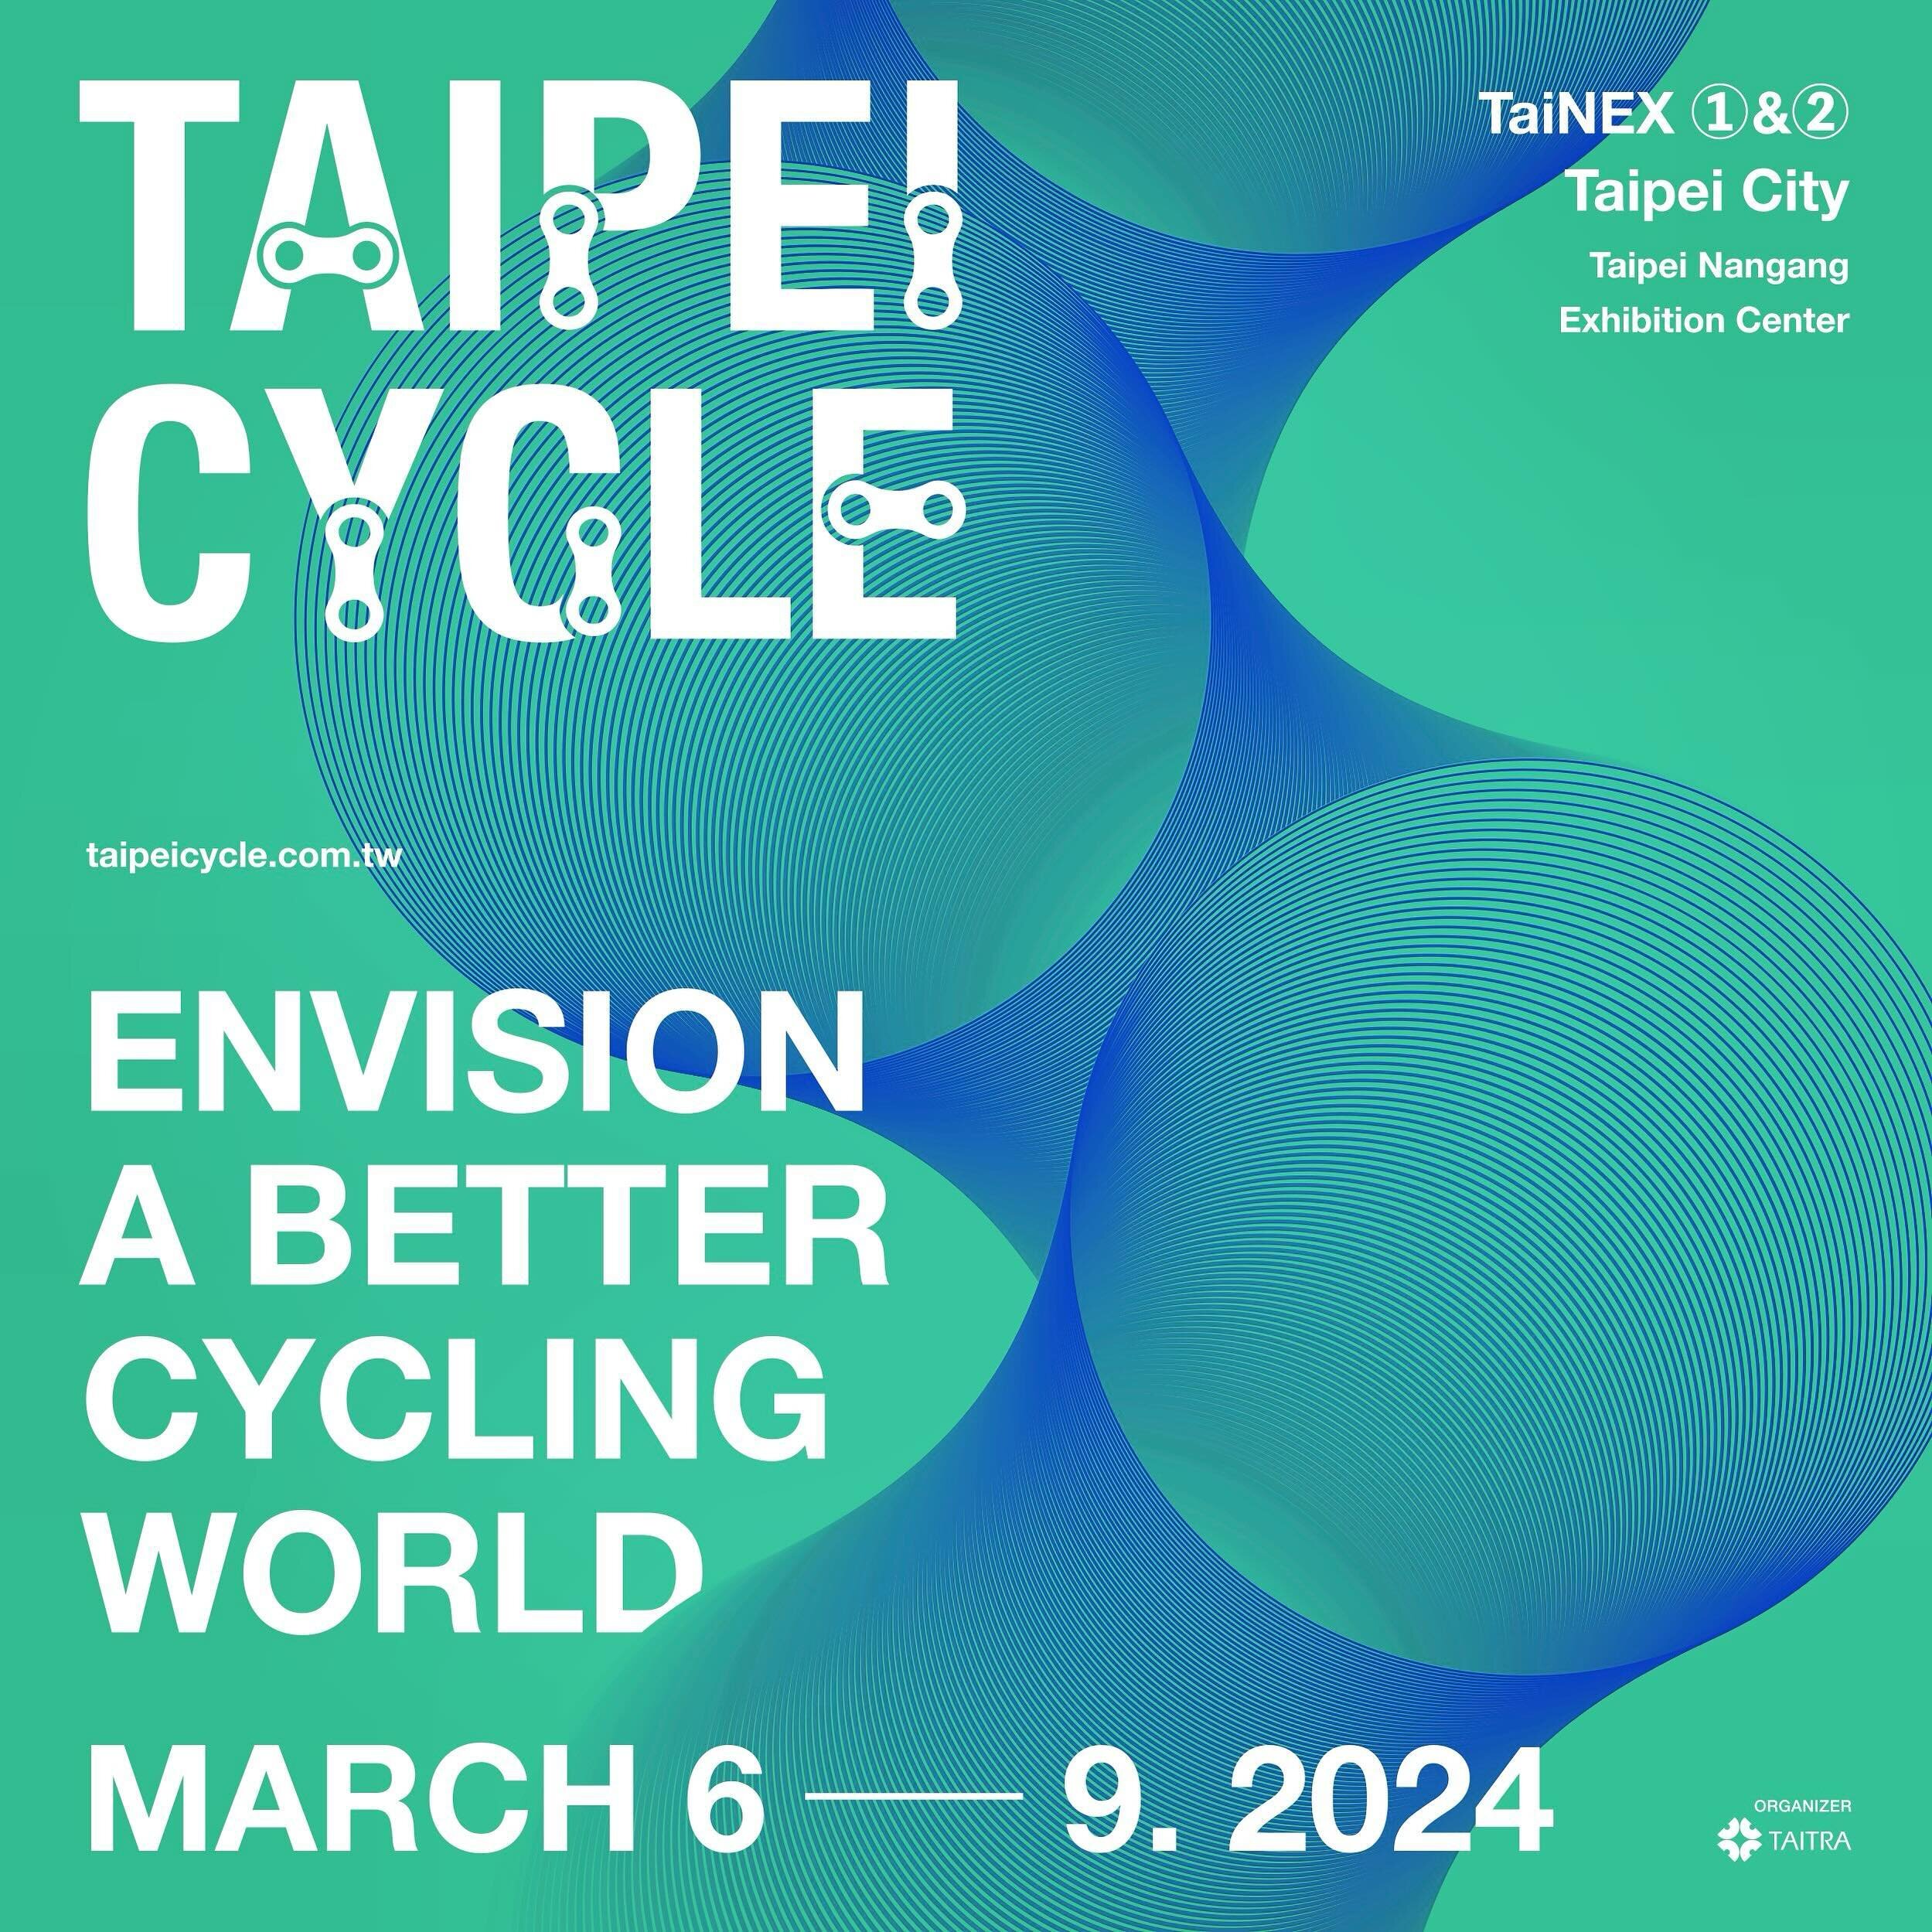 The 2024 Taipei Cycle trade show begins in just a week from now from March 6 to March 9. Are you visiting Taiwan this year? Let&rsquo;s meet :) 

#WeCreateAdvantage

#oerus #bike #bicycle #ebike #electricbike #electricbicycle #emtb #bicyclefactory #b